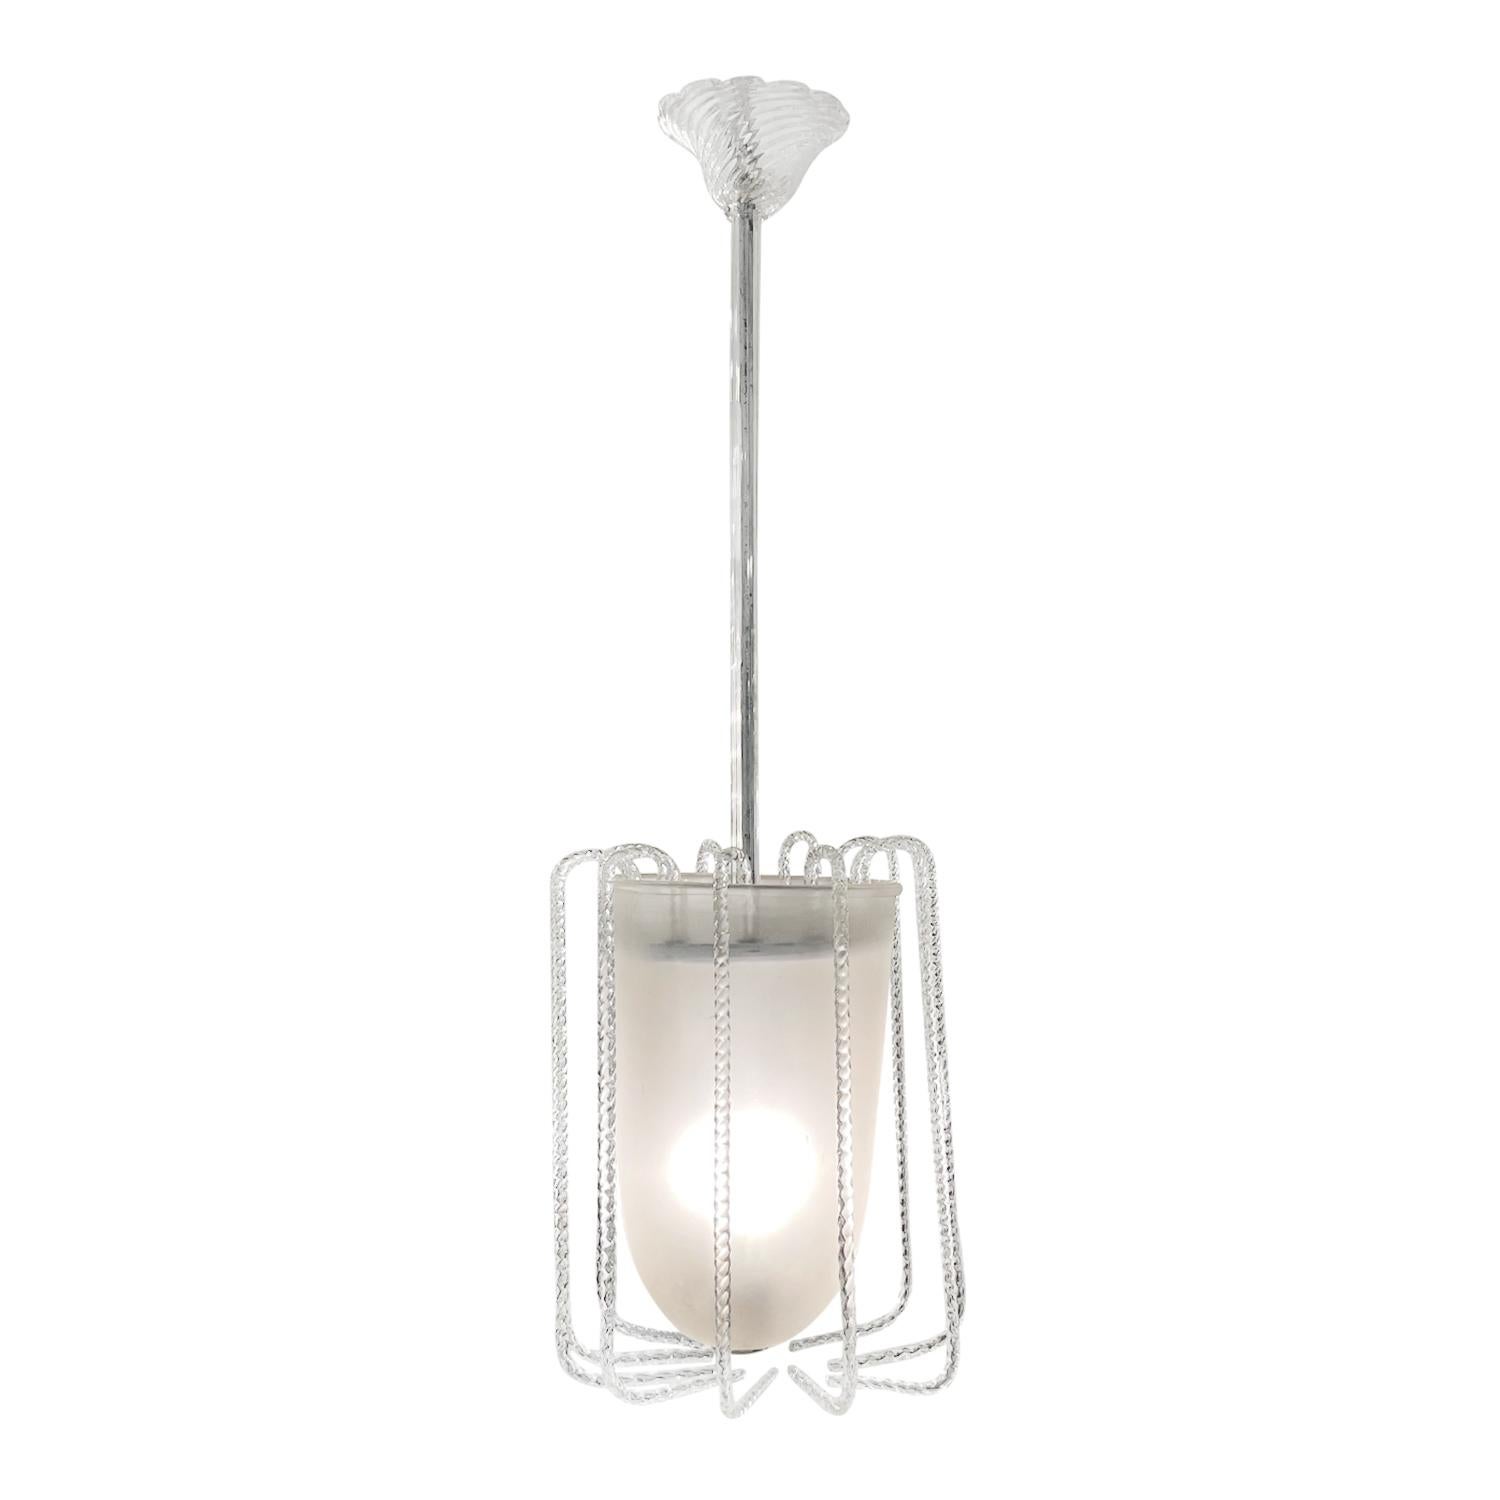 A round vintage Mid-Century modern Italian raindrop chandelier, pendant made of hand blown smoked Murano glass, designed by Ercole Barovier and produced by Barovier & Toso in good condition. The detailed ceiling light, lamp is supported by a long